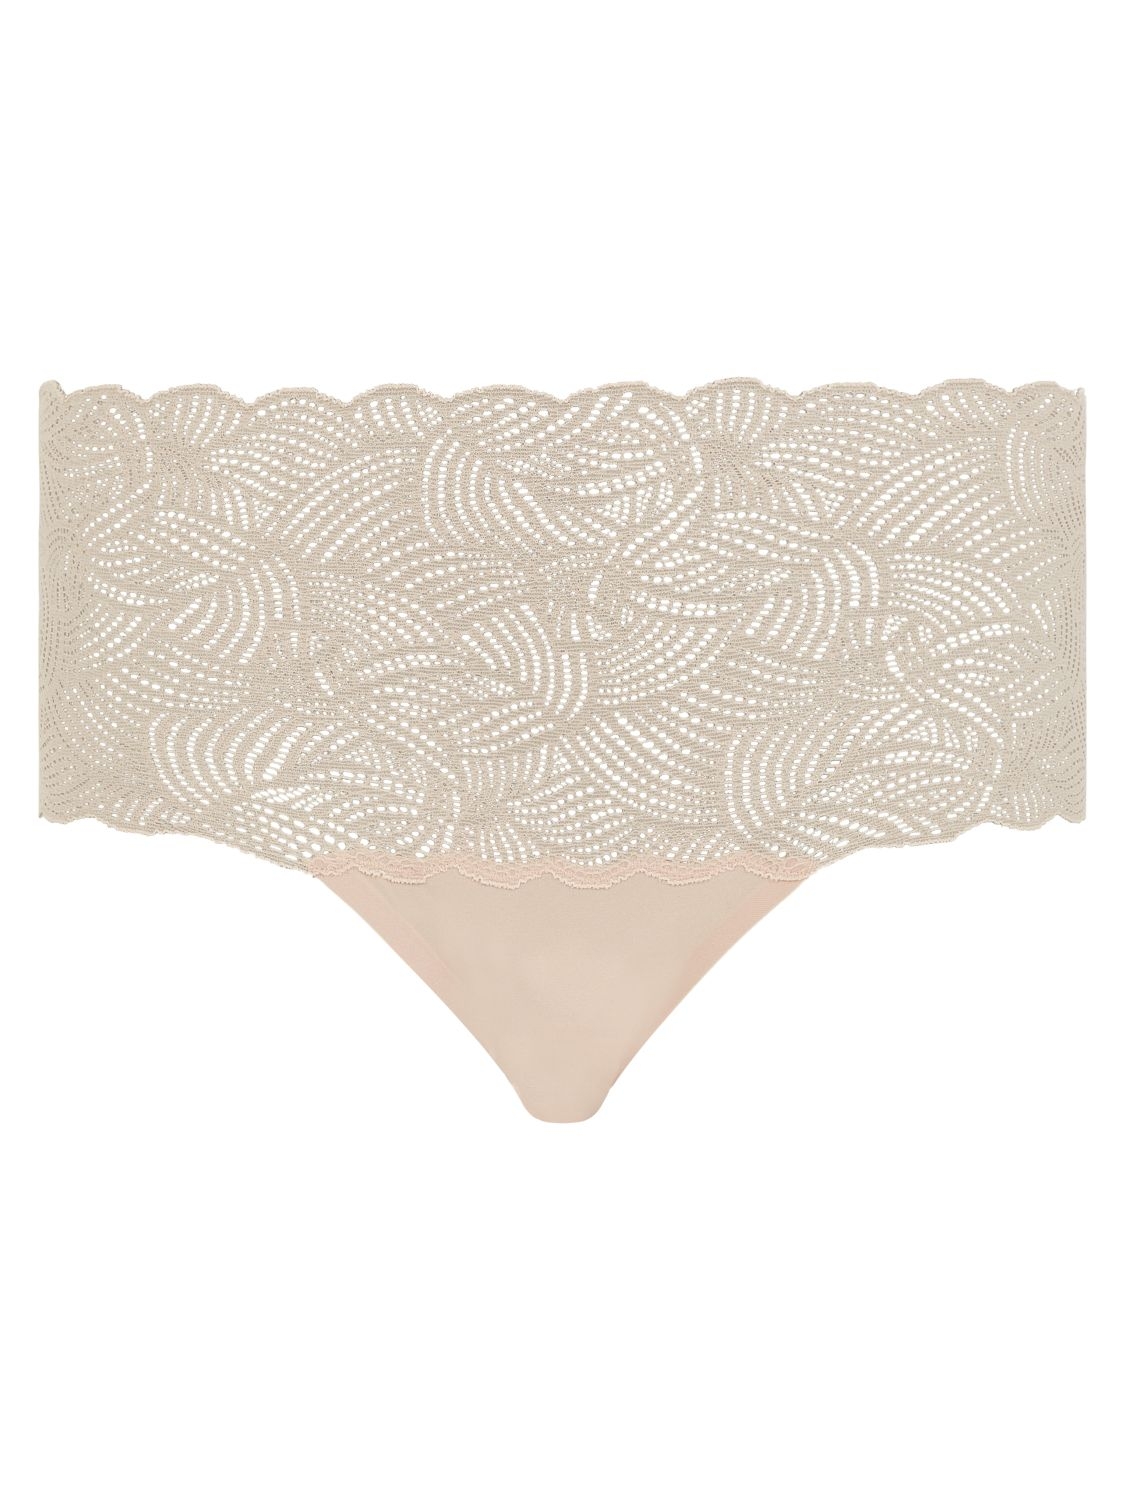 Chantelle Soft Stretch High Waisted Brief: Nude - Chantilly Online